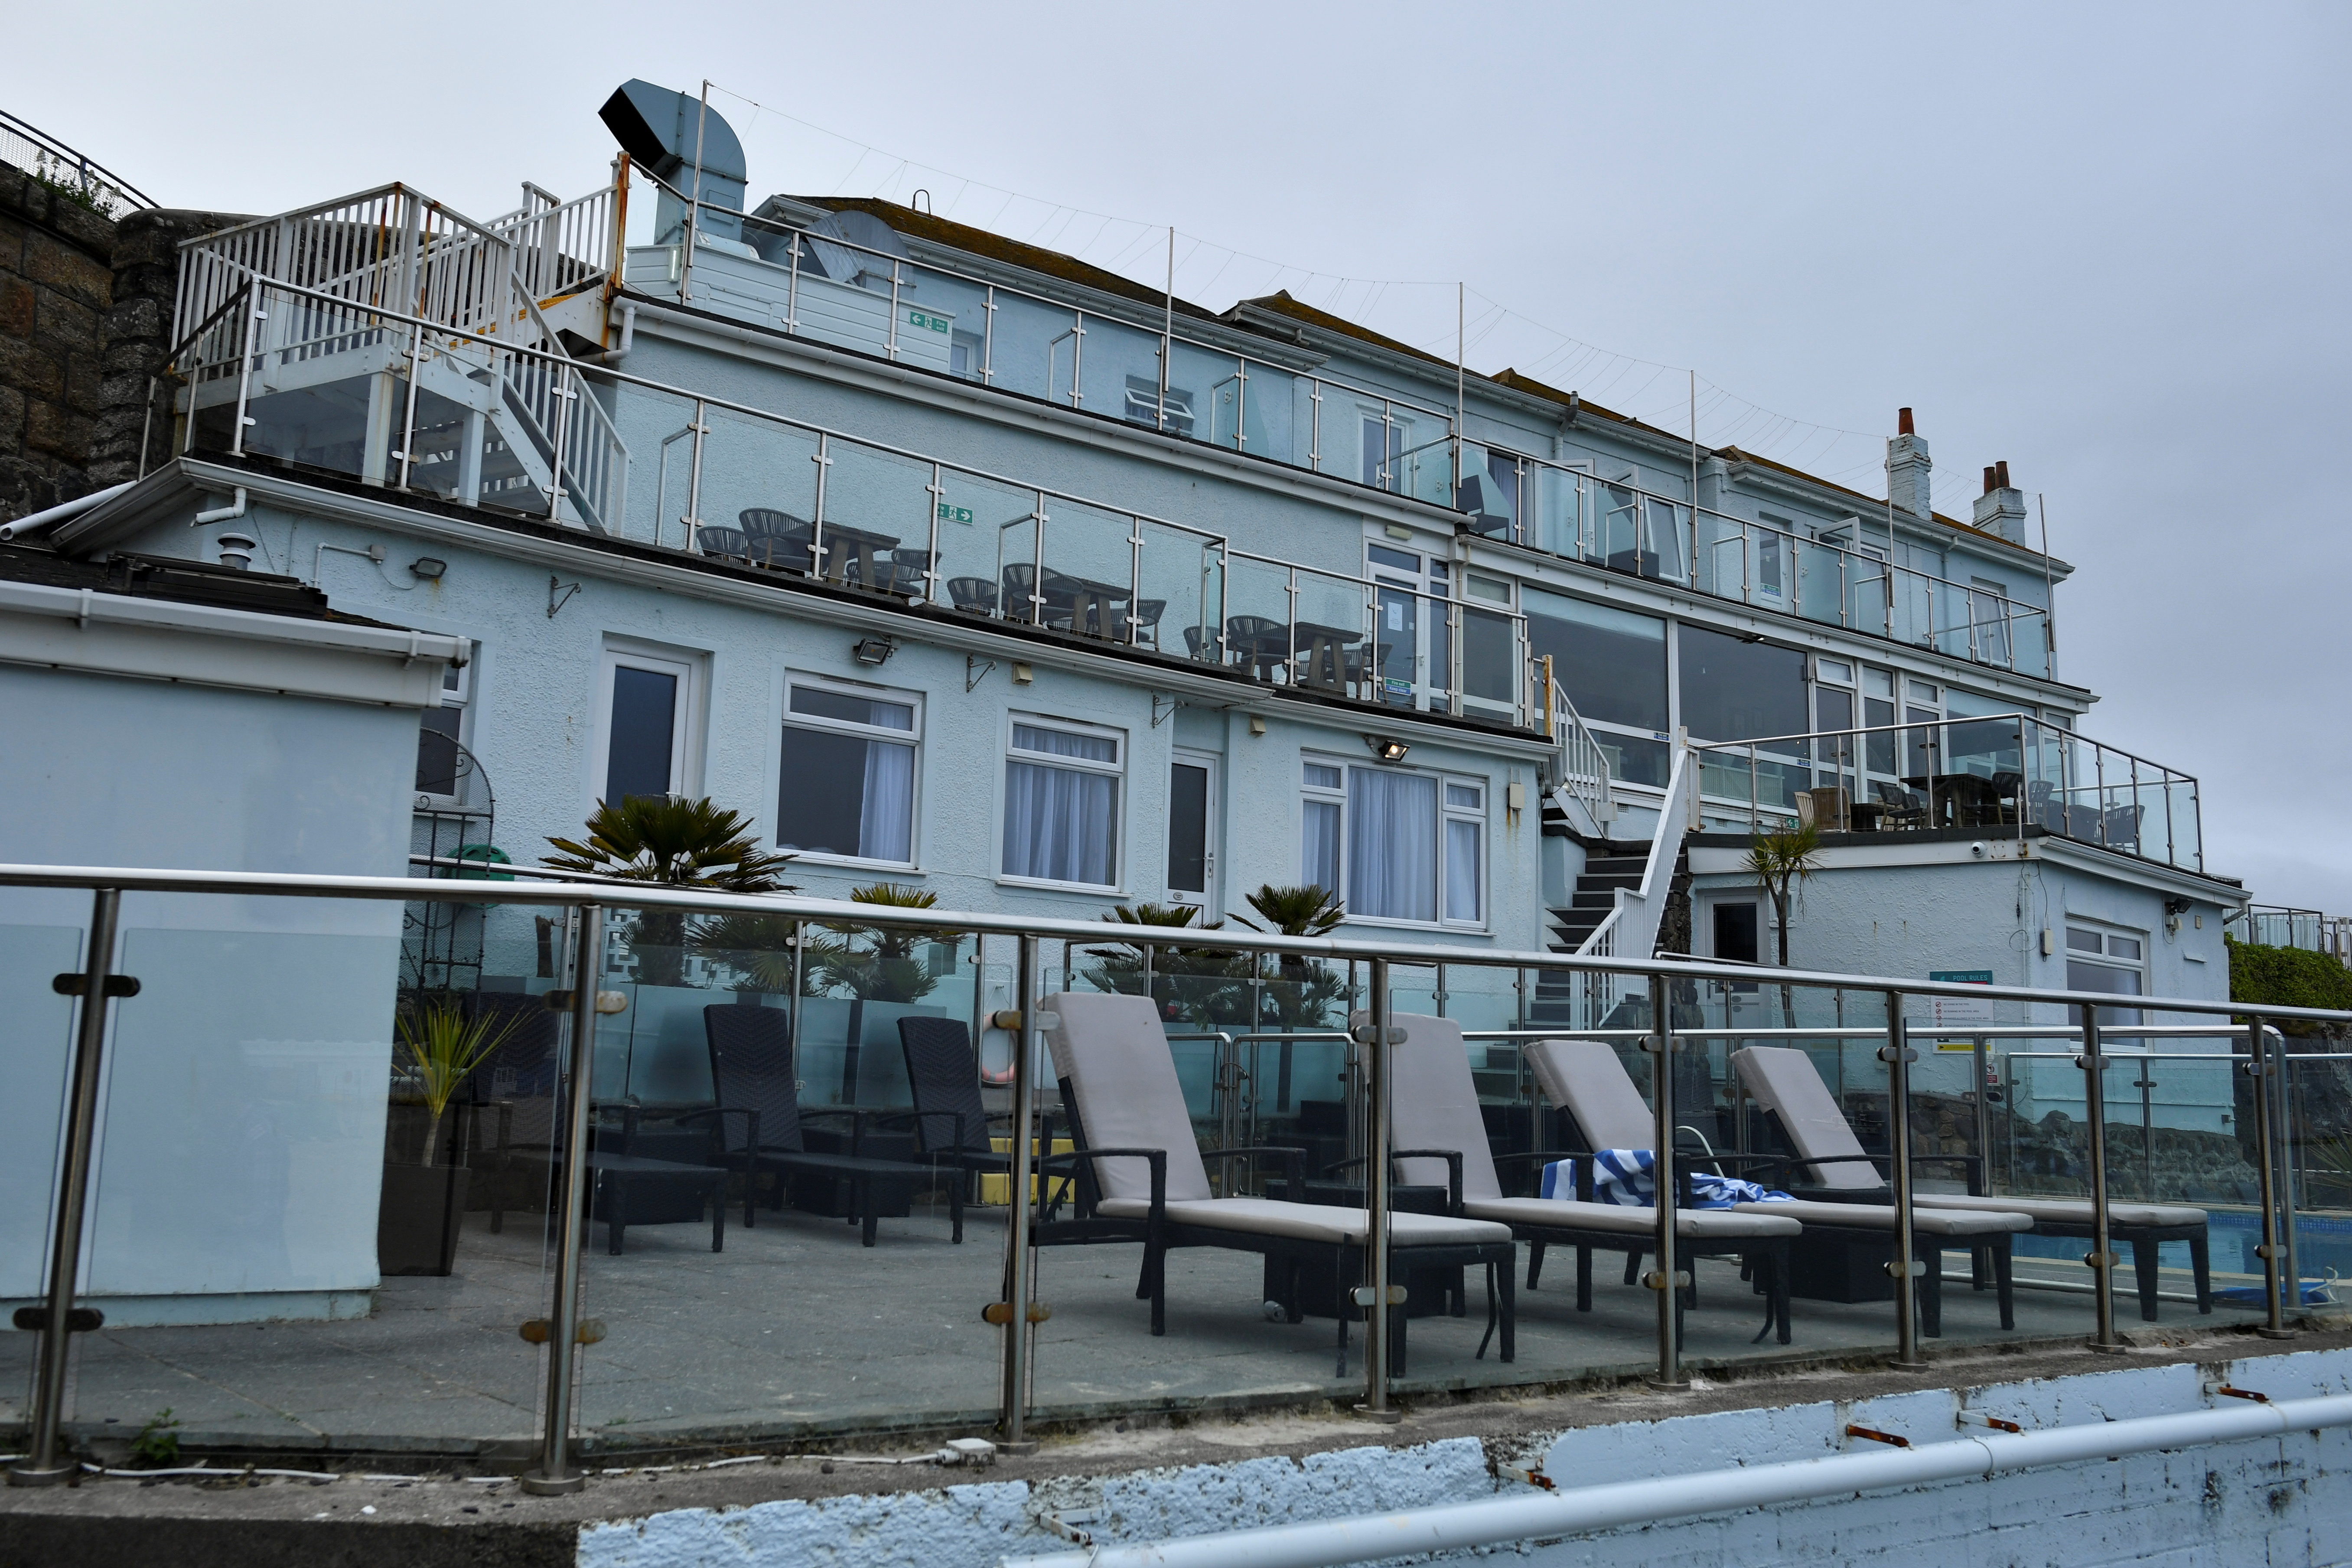 The Pedn Olva Hotel is seen, after it was closed due to a guest contracting coronavirus disease (COVID-19), during the G7 leaders summit, in St Ives